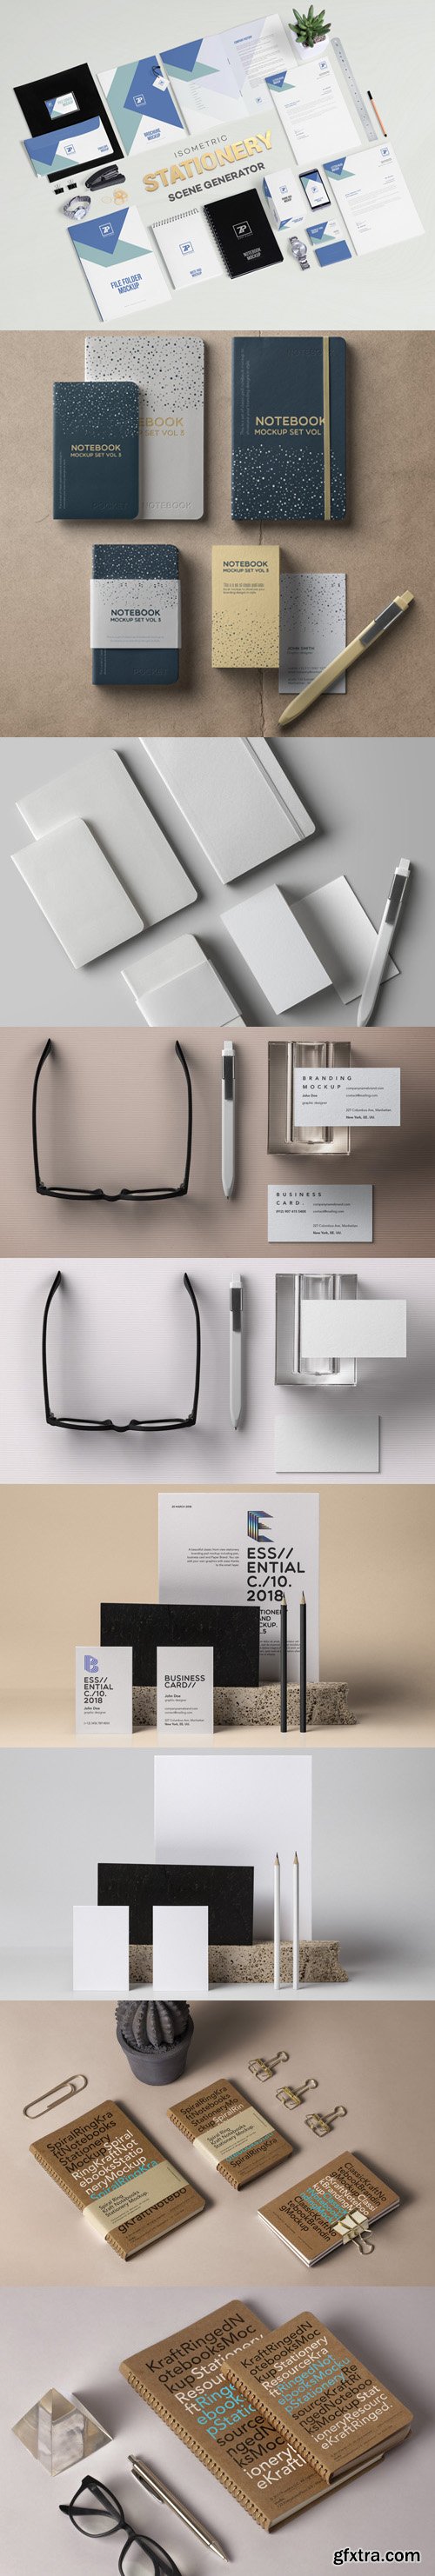 9 Corporate Identity Branding Stationary PSD Mockups Collection